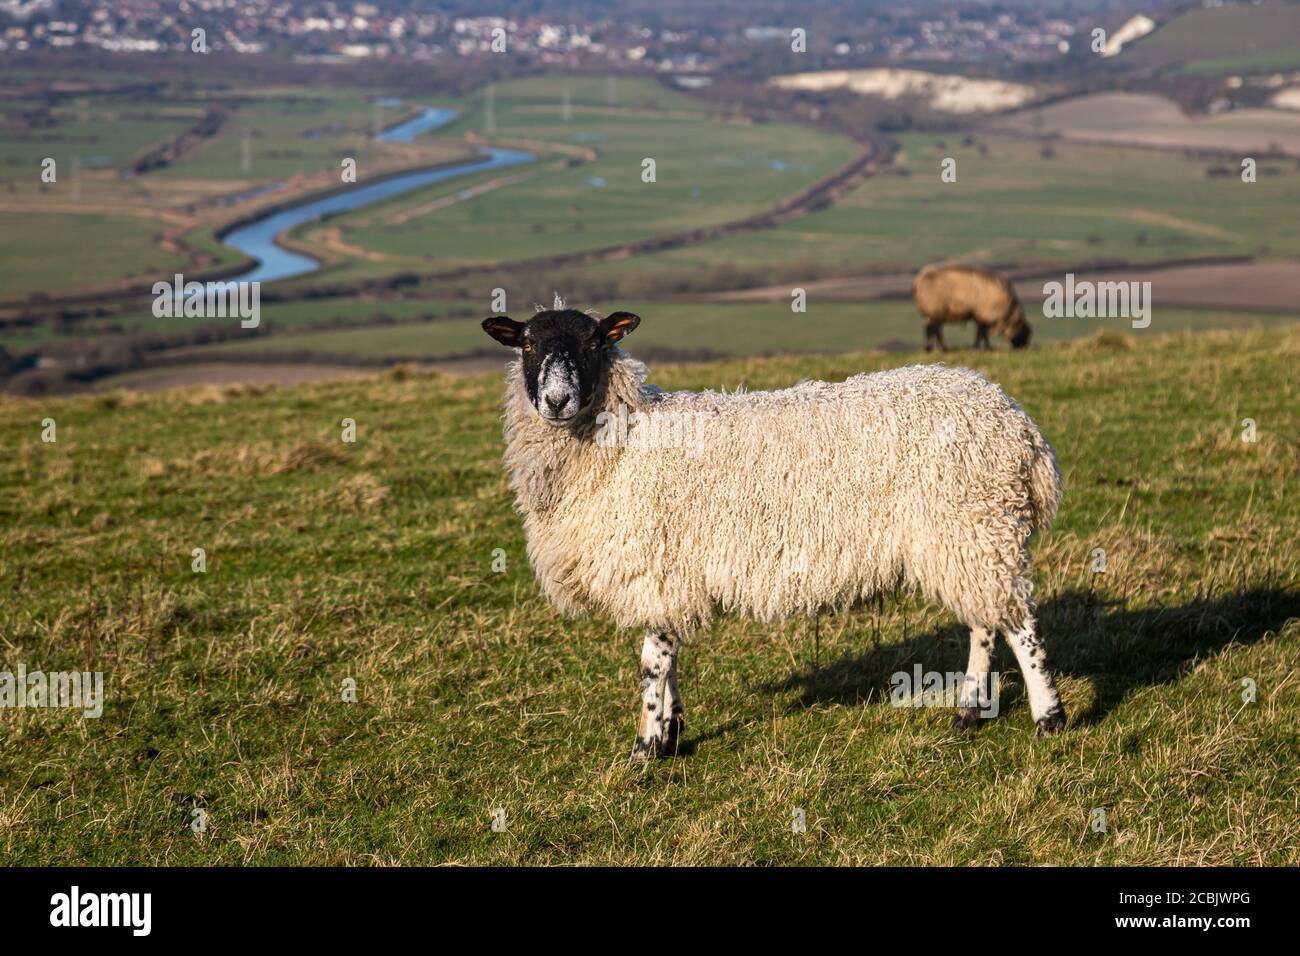 Sheep on a South Downs hillside with the winding River Ouse and town of Lewes in the background Stock Photo